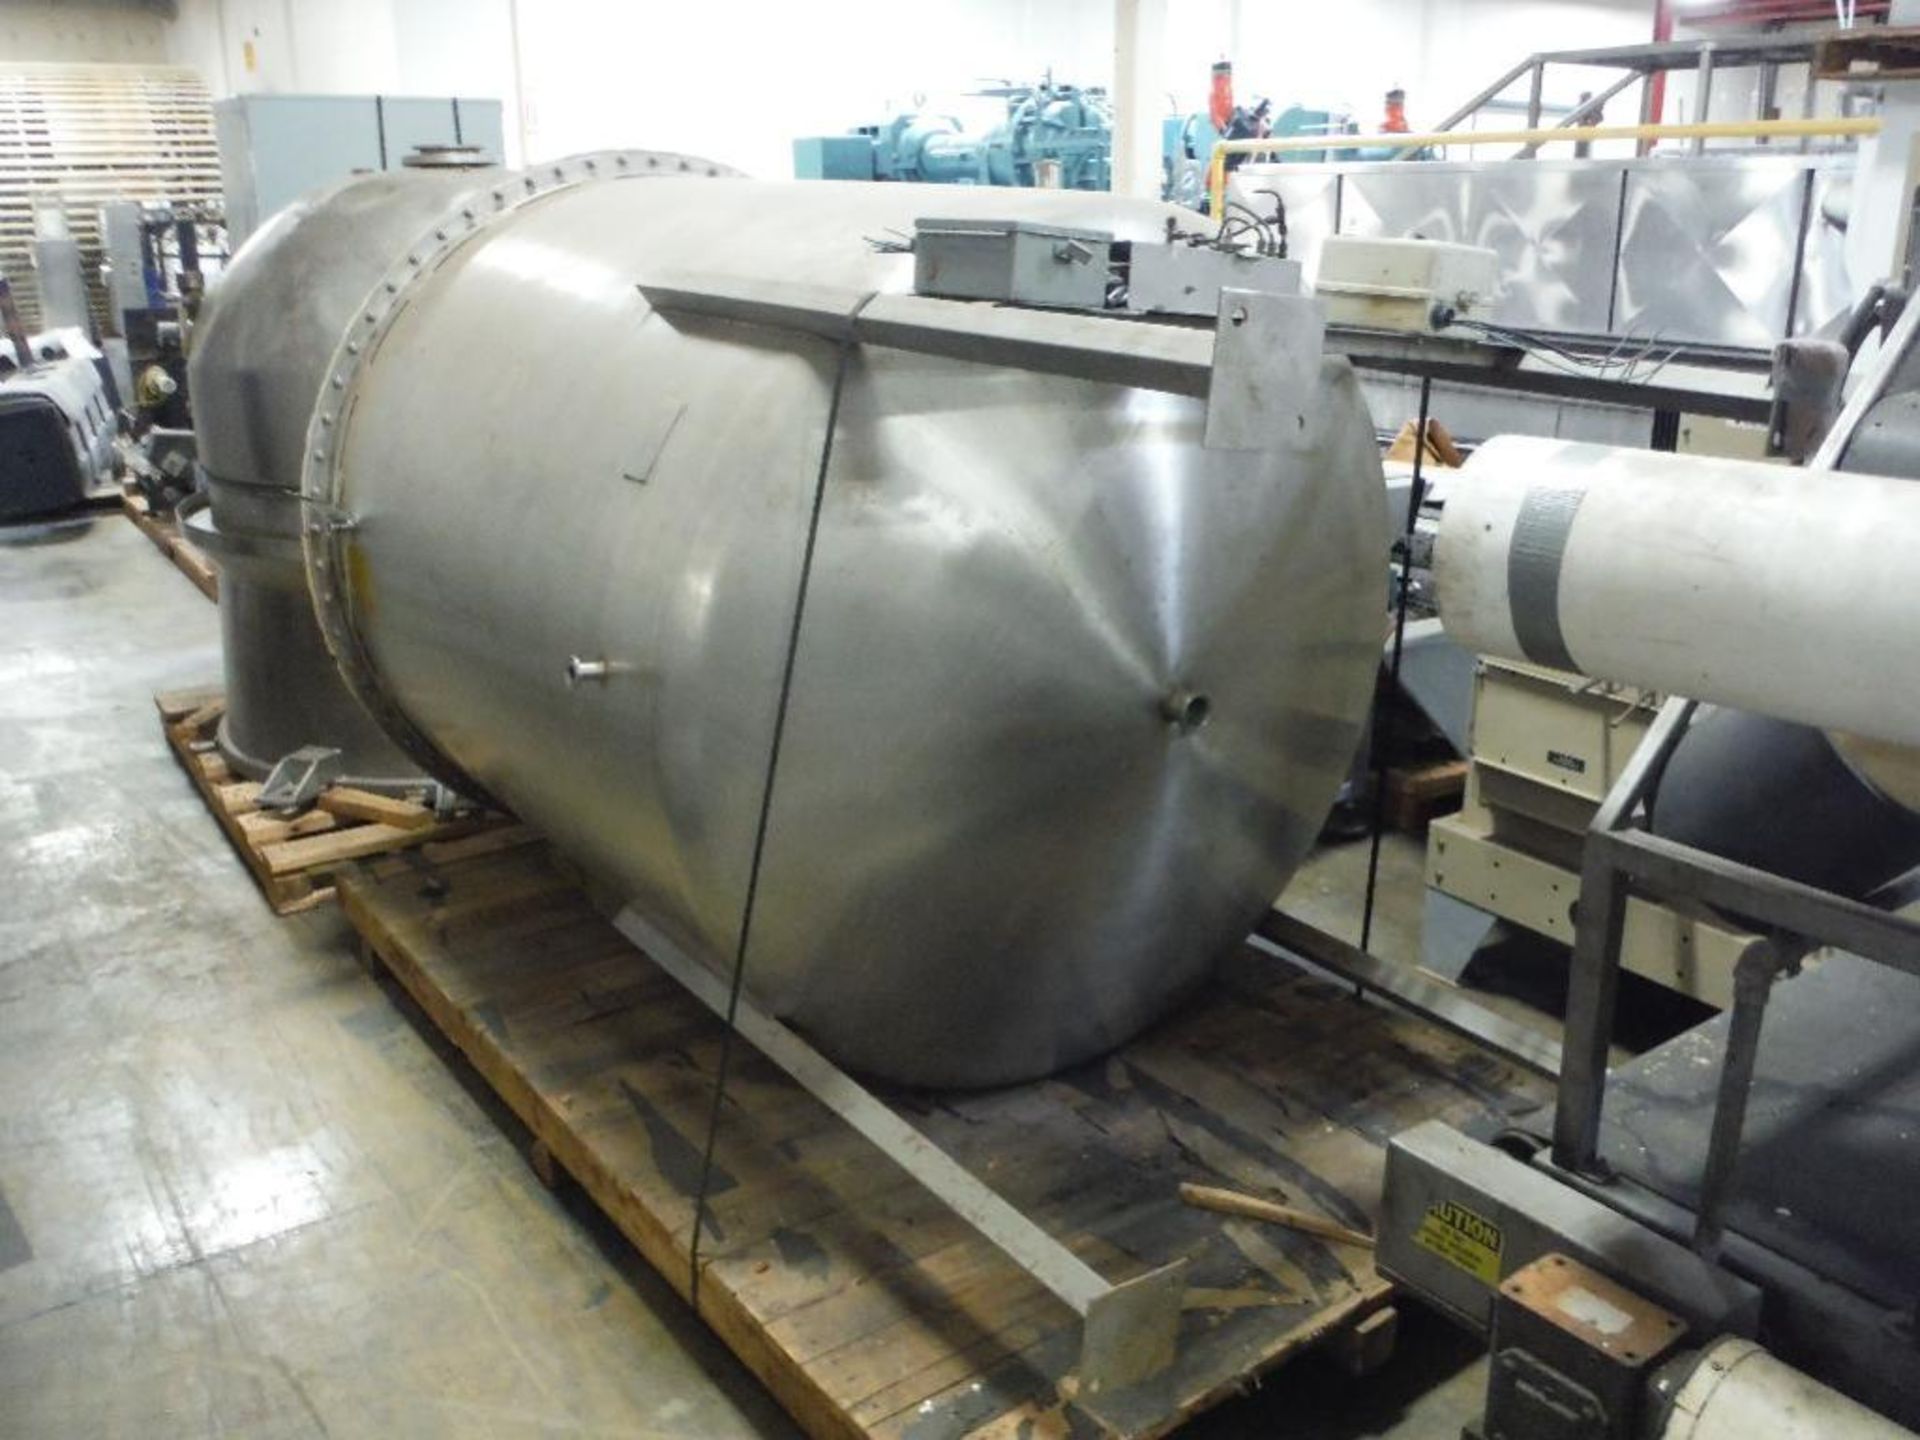 1992 Bulk mfg. SS pressure vessel, 316 SS, 15 psi, 58 in. dia x 78 in. straight side, dish top and b - Image 3 of 6